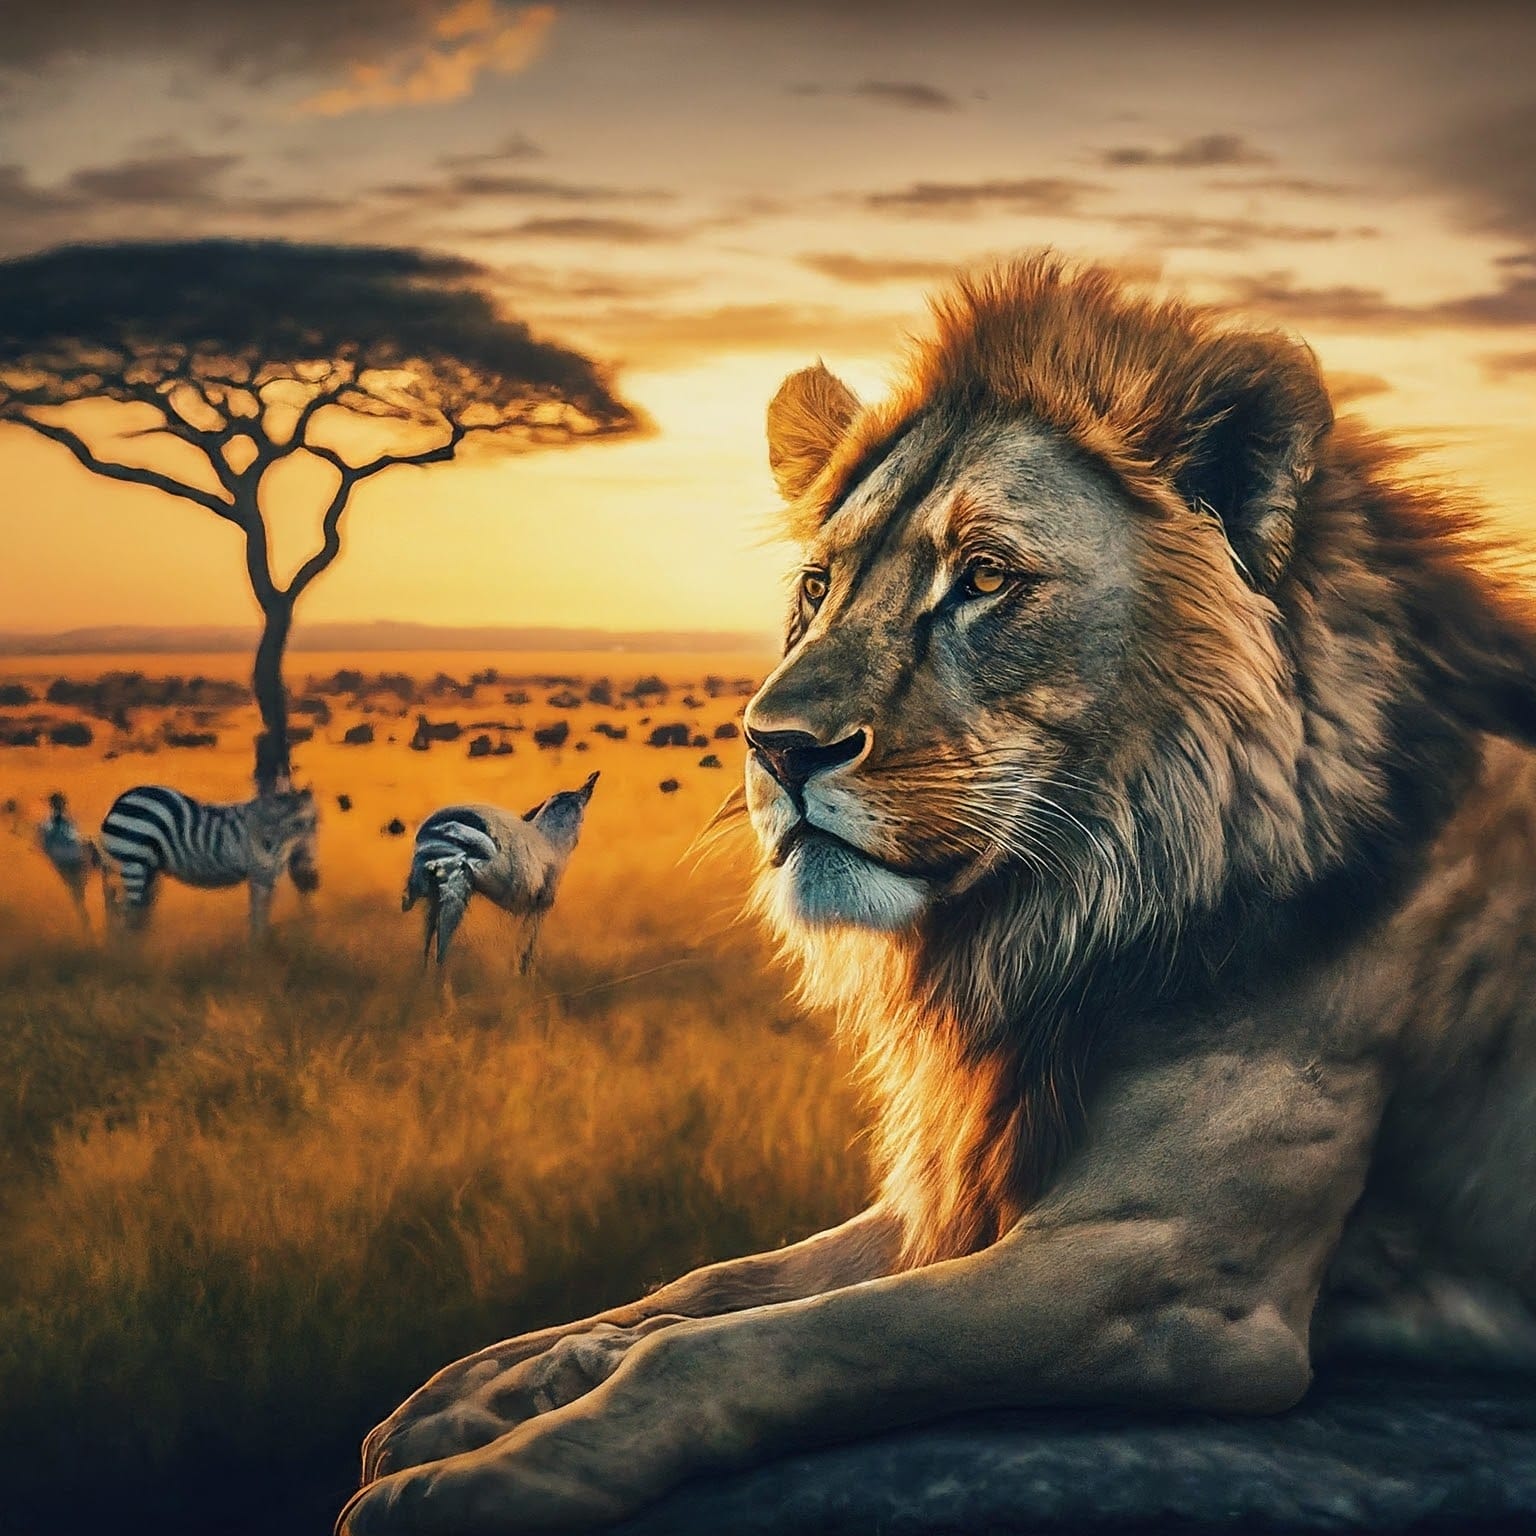 A majestic lion surveys the sprawling plains of the Masai Mara, silhouetted against the golden light of the setting sun. In the distance, a herd of zebras and wildebeests graze peacefully.